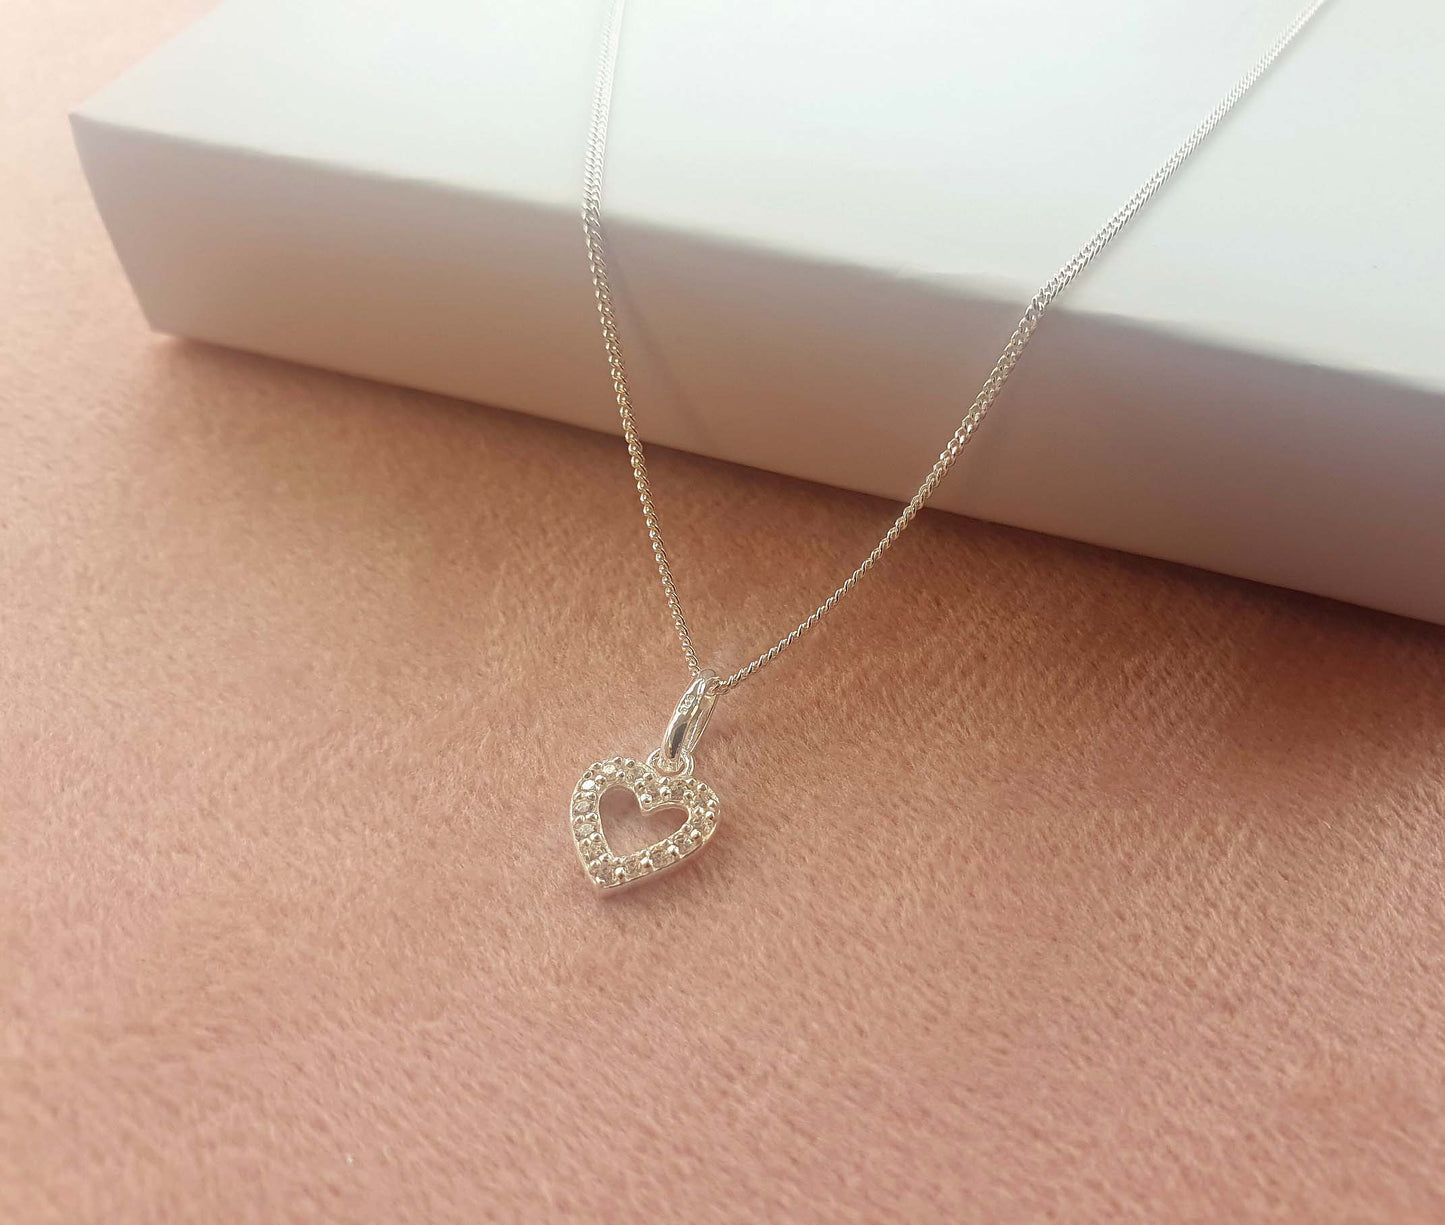 Sister Cubic Zirconia Heart Necklace with Birthstone in Sterling Silver 925, Personalised Gift